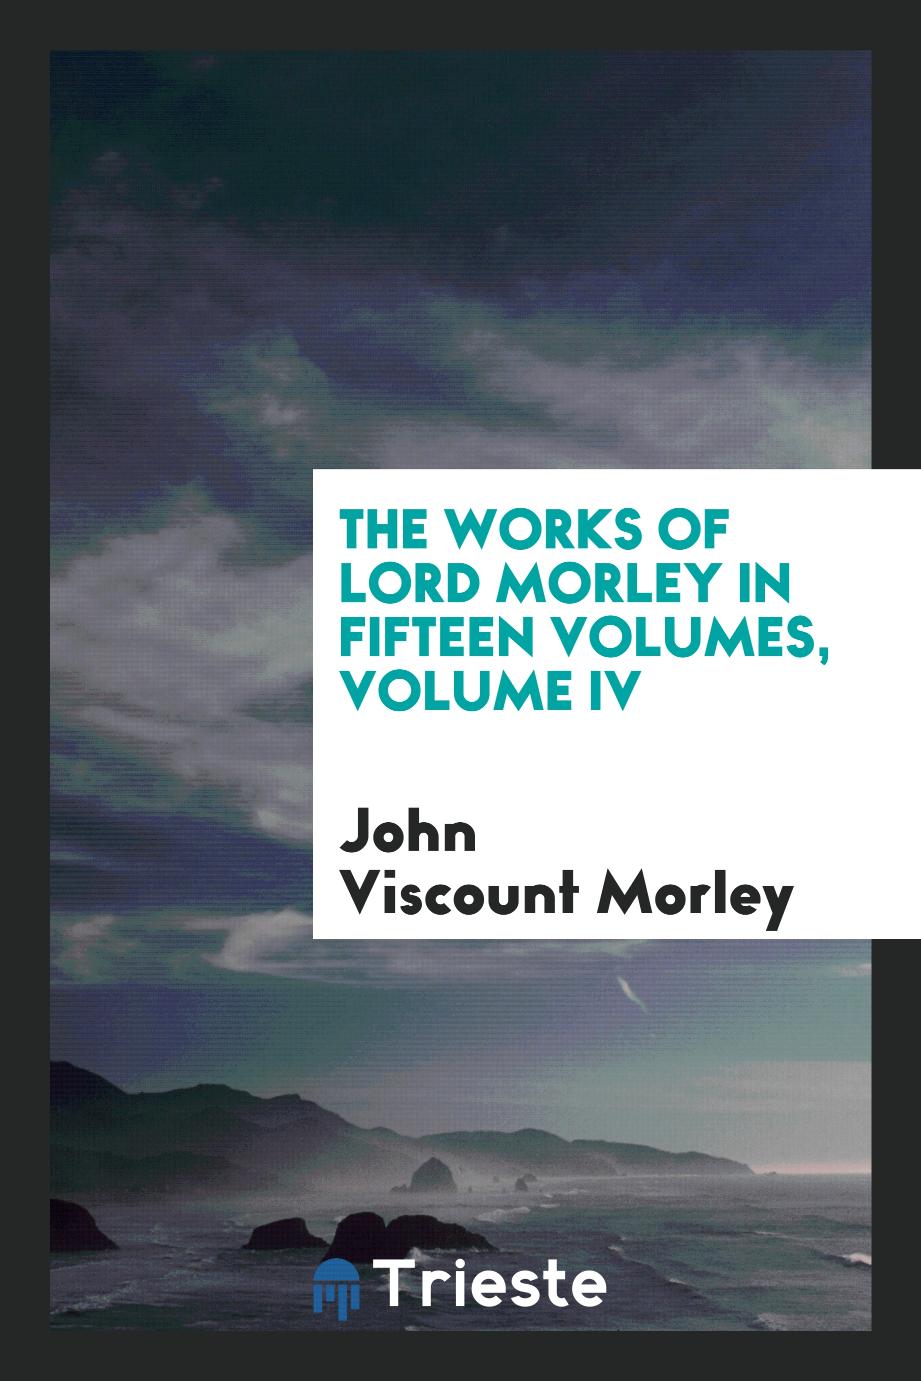 The works of Lord Morley in Fifteen Volumes, Volume IV